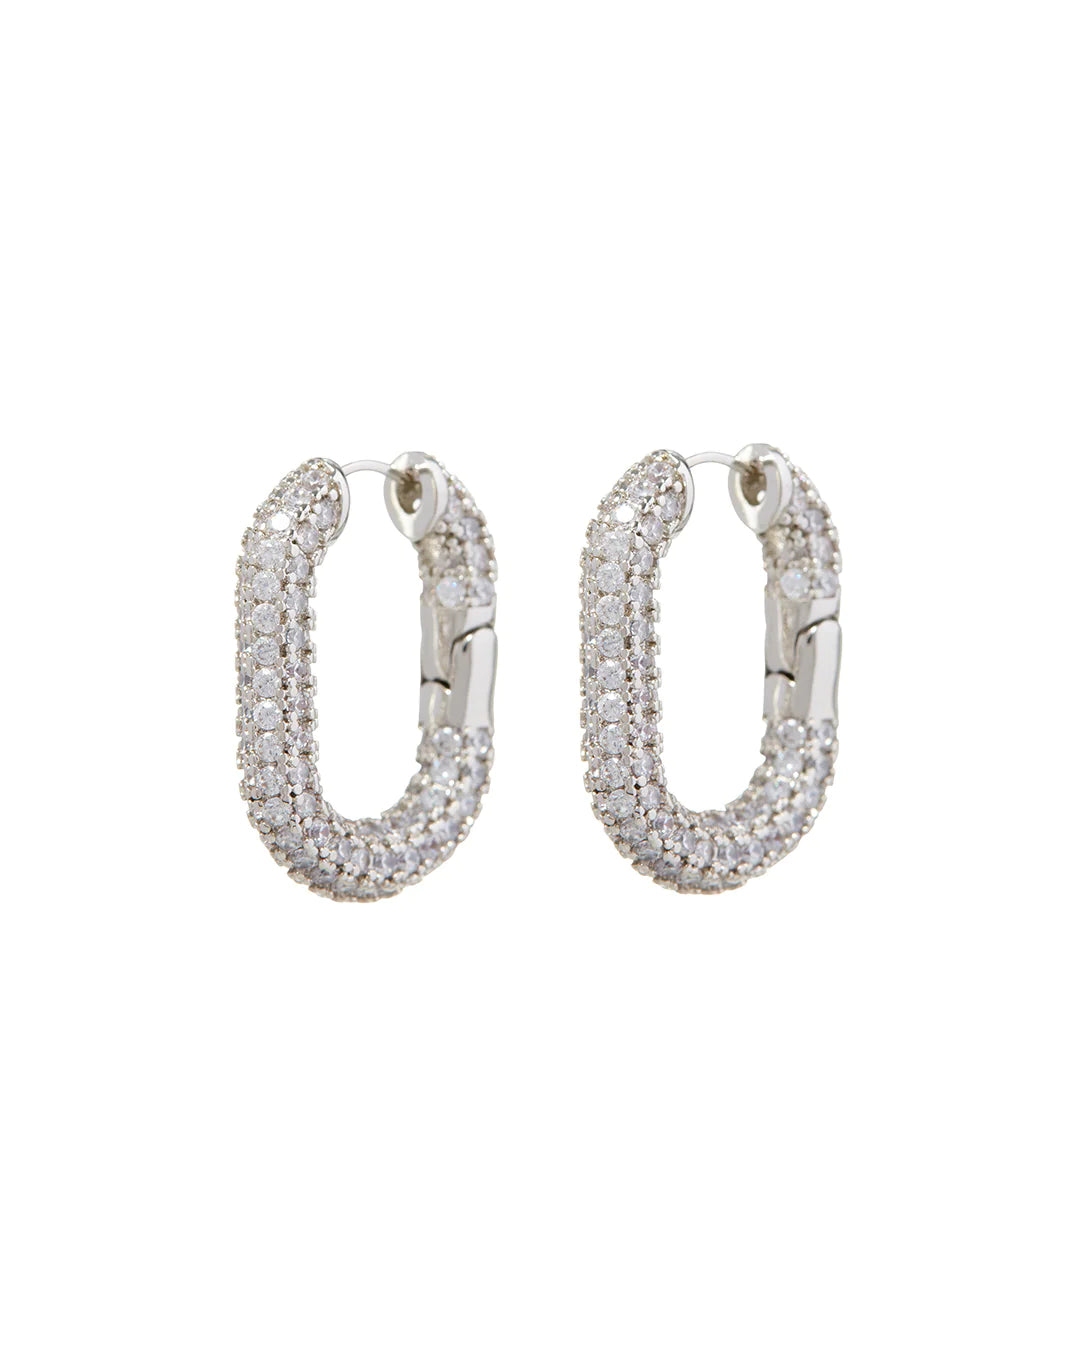 XL Pave Chain Link Hoops by LUV AJ in Silver